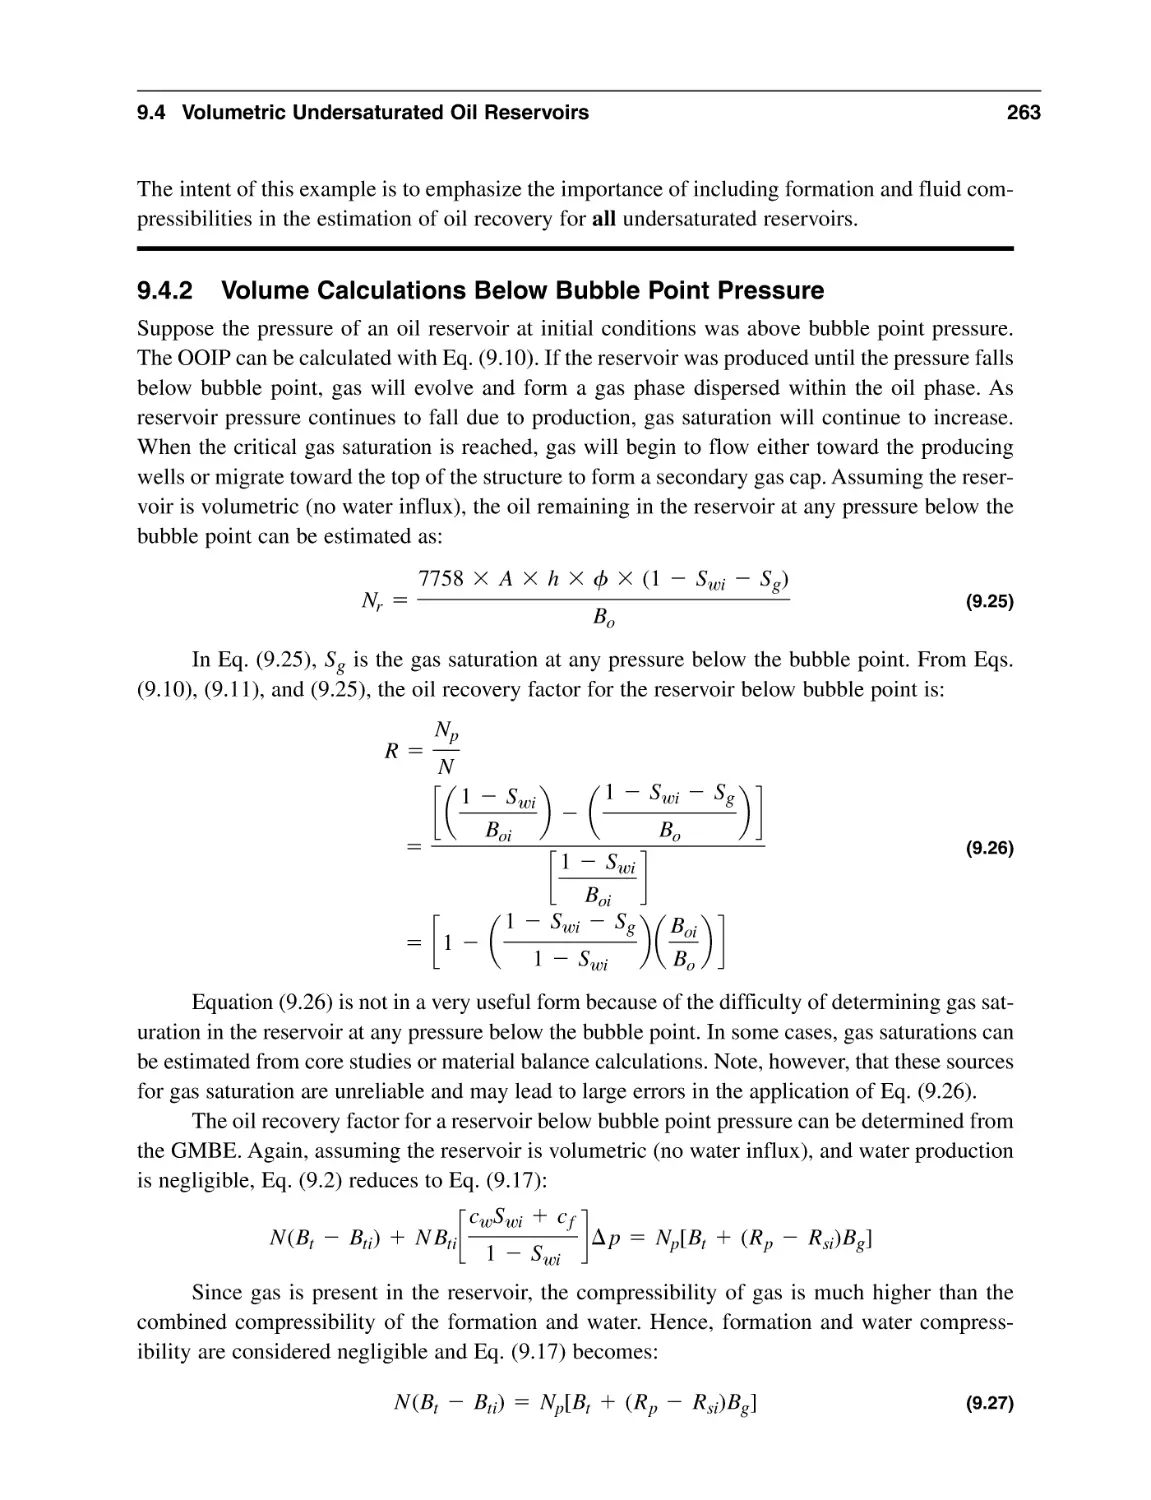 9.4.2 Volume Calculations Below Bubble Point Pressure